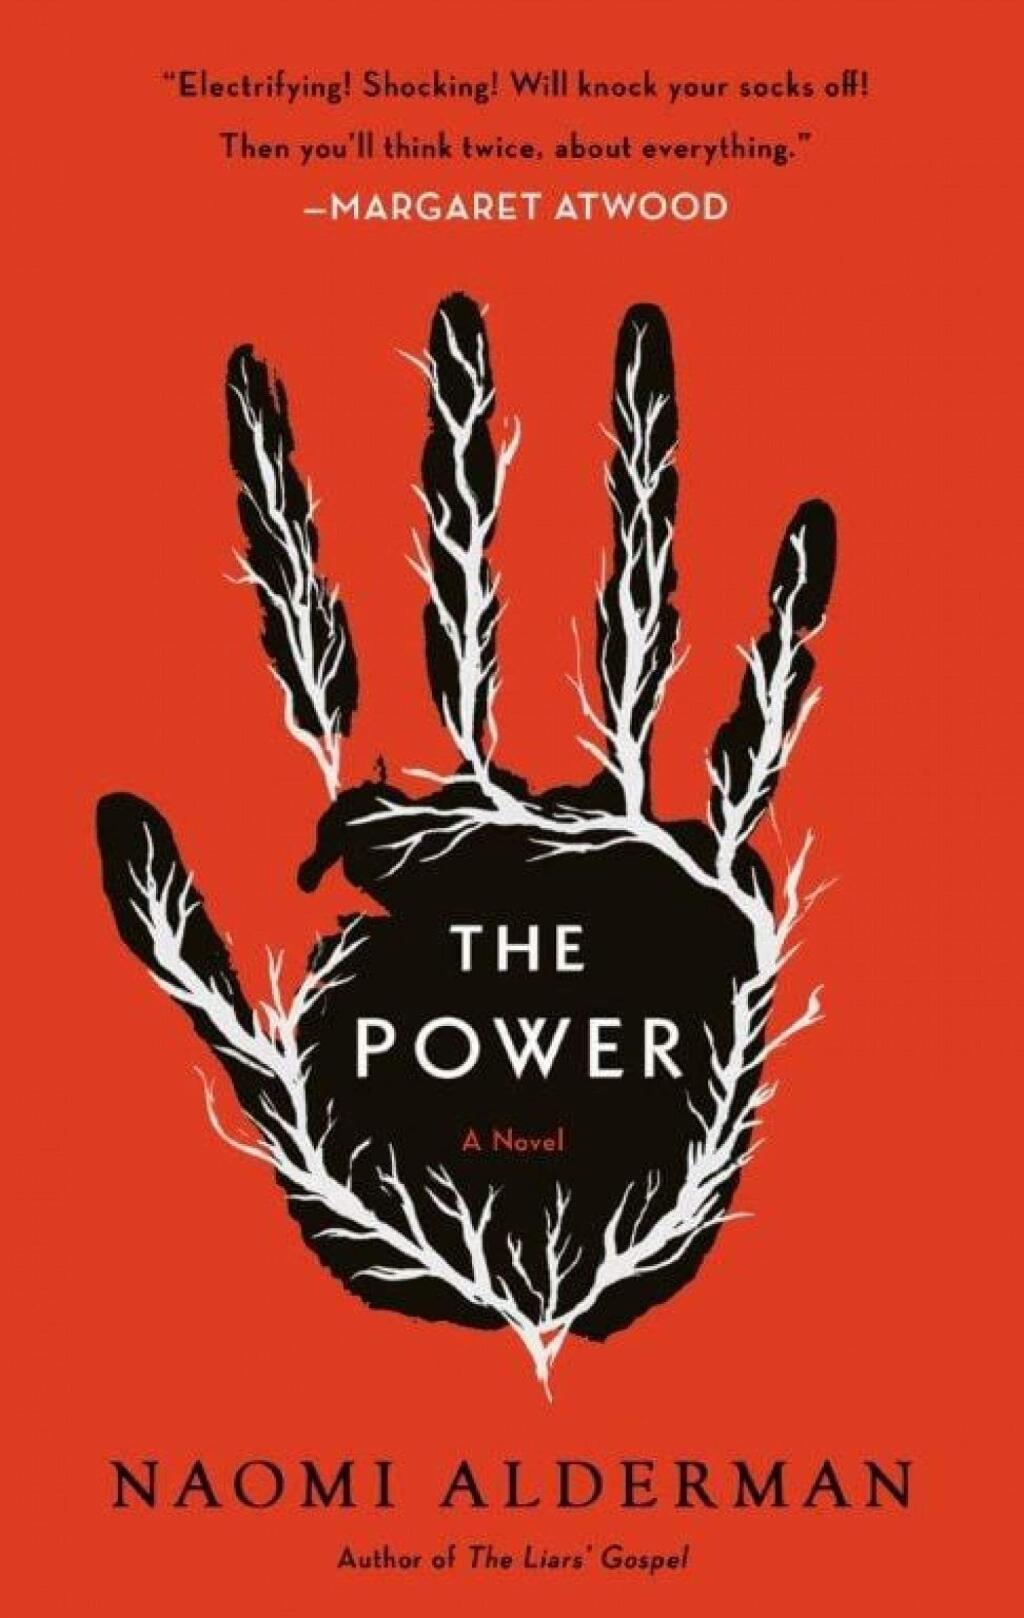 Naomi Anderson's 'The Power' strikes the Top 10 list this week, appearing in the No. 3 spot.